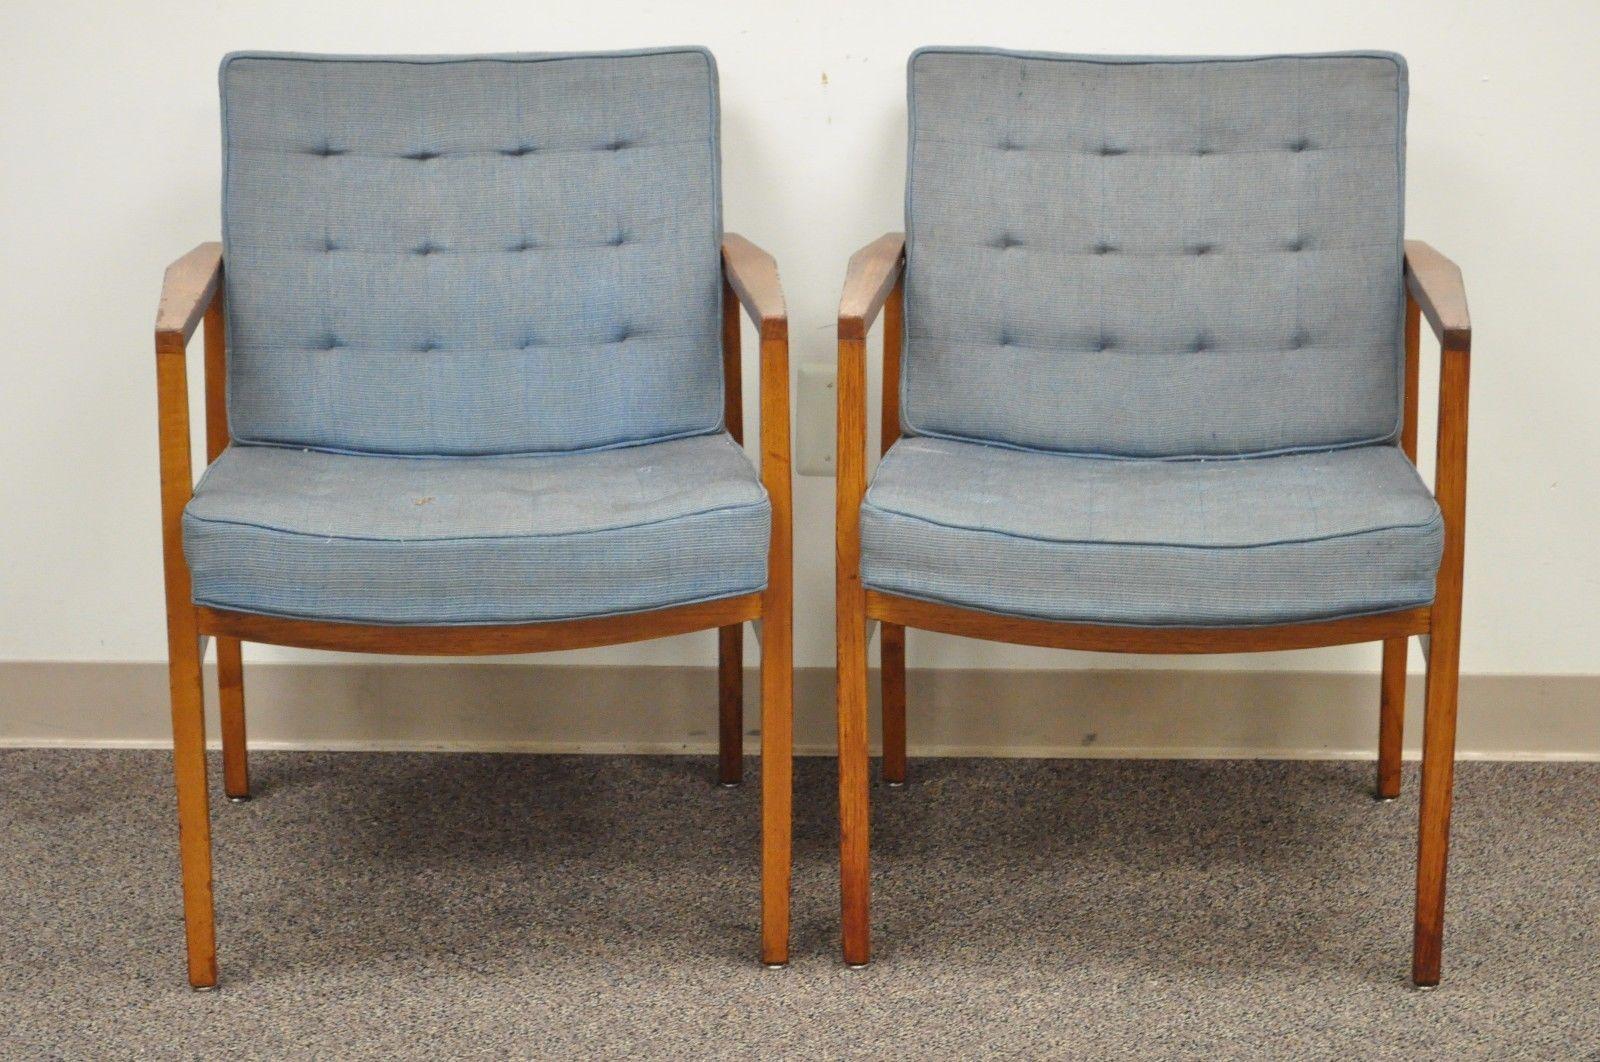 Pair of Early Knoll International armchairs. Made in Belgium. Design attributed to Florence Knoll. Item features clean modernist lines, heavy solid wood frames (Believed to be Walnut), and retains original label which reads 